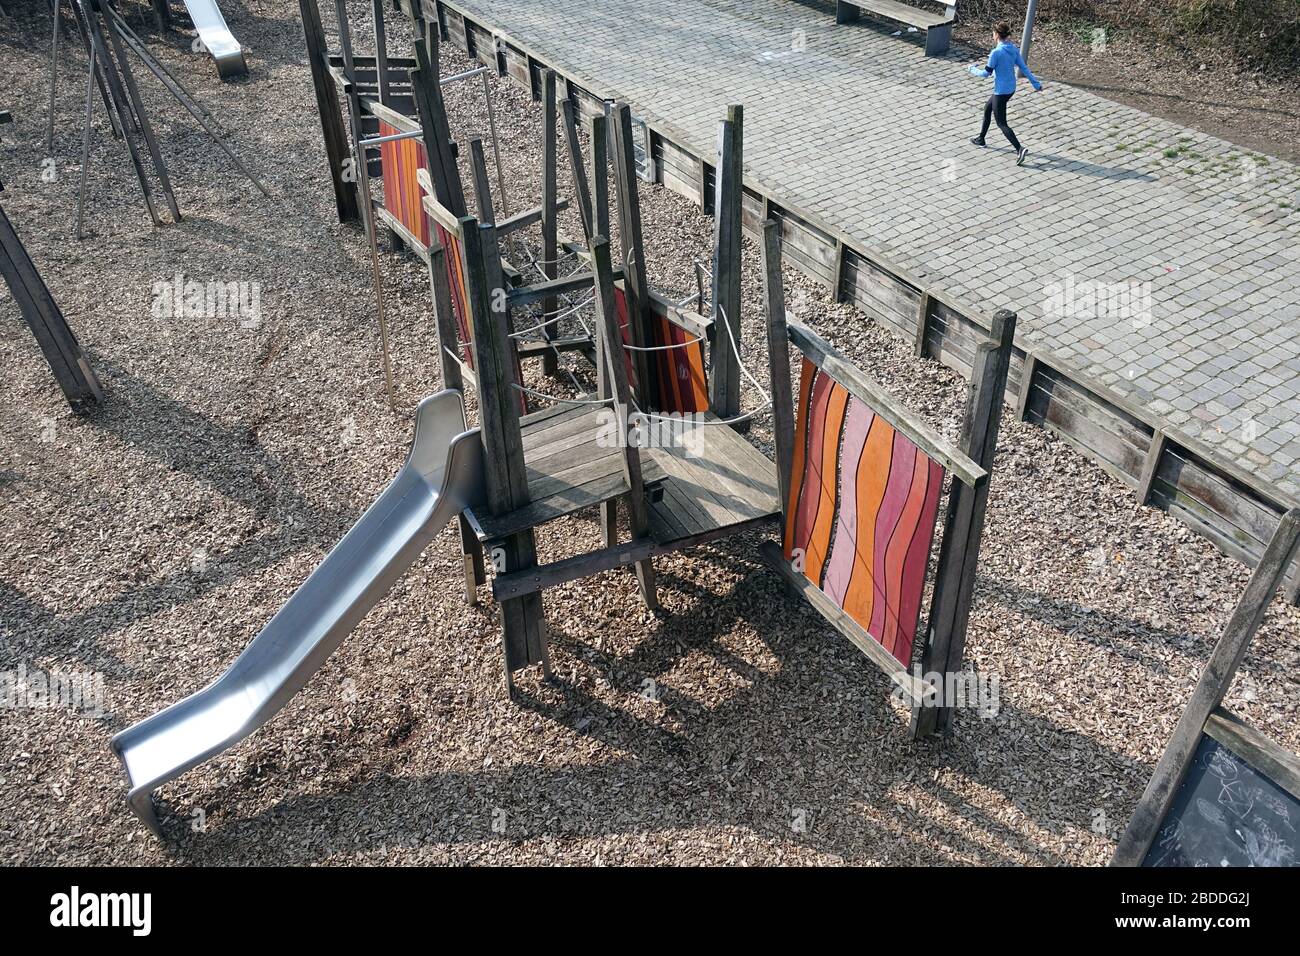 17.03.2020, Berlin, Berlin, Germany - Effects of the Corona Virus: No children on a playground. 00S200317D605CAROEX.JPG [MODEL RELEASE: NO, PROPERTY R Stock Photo